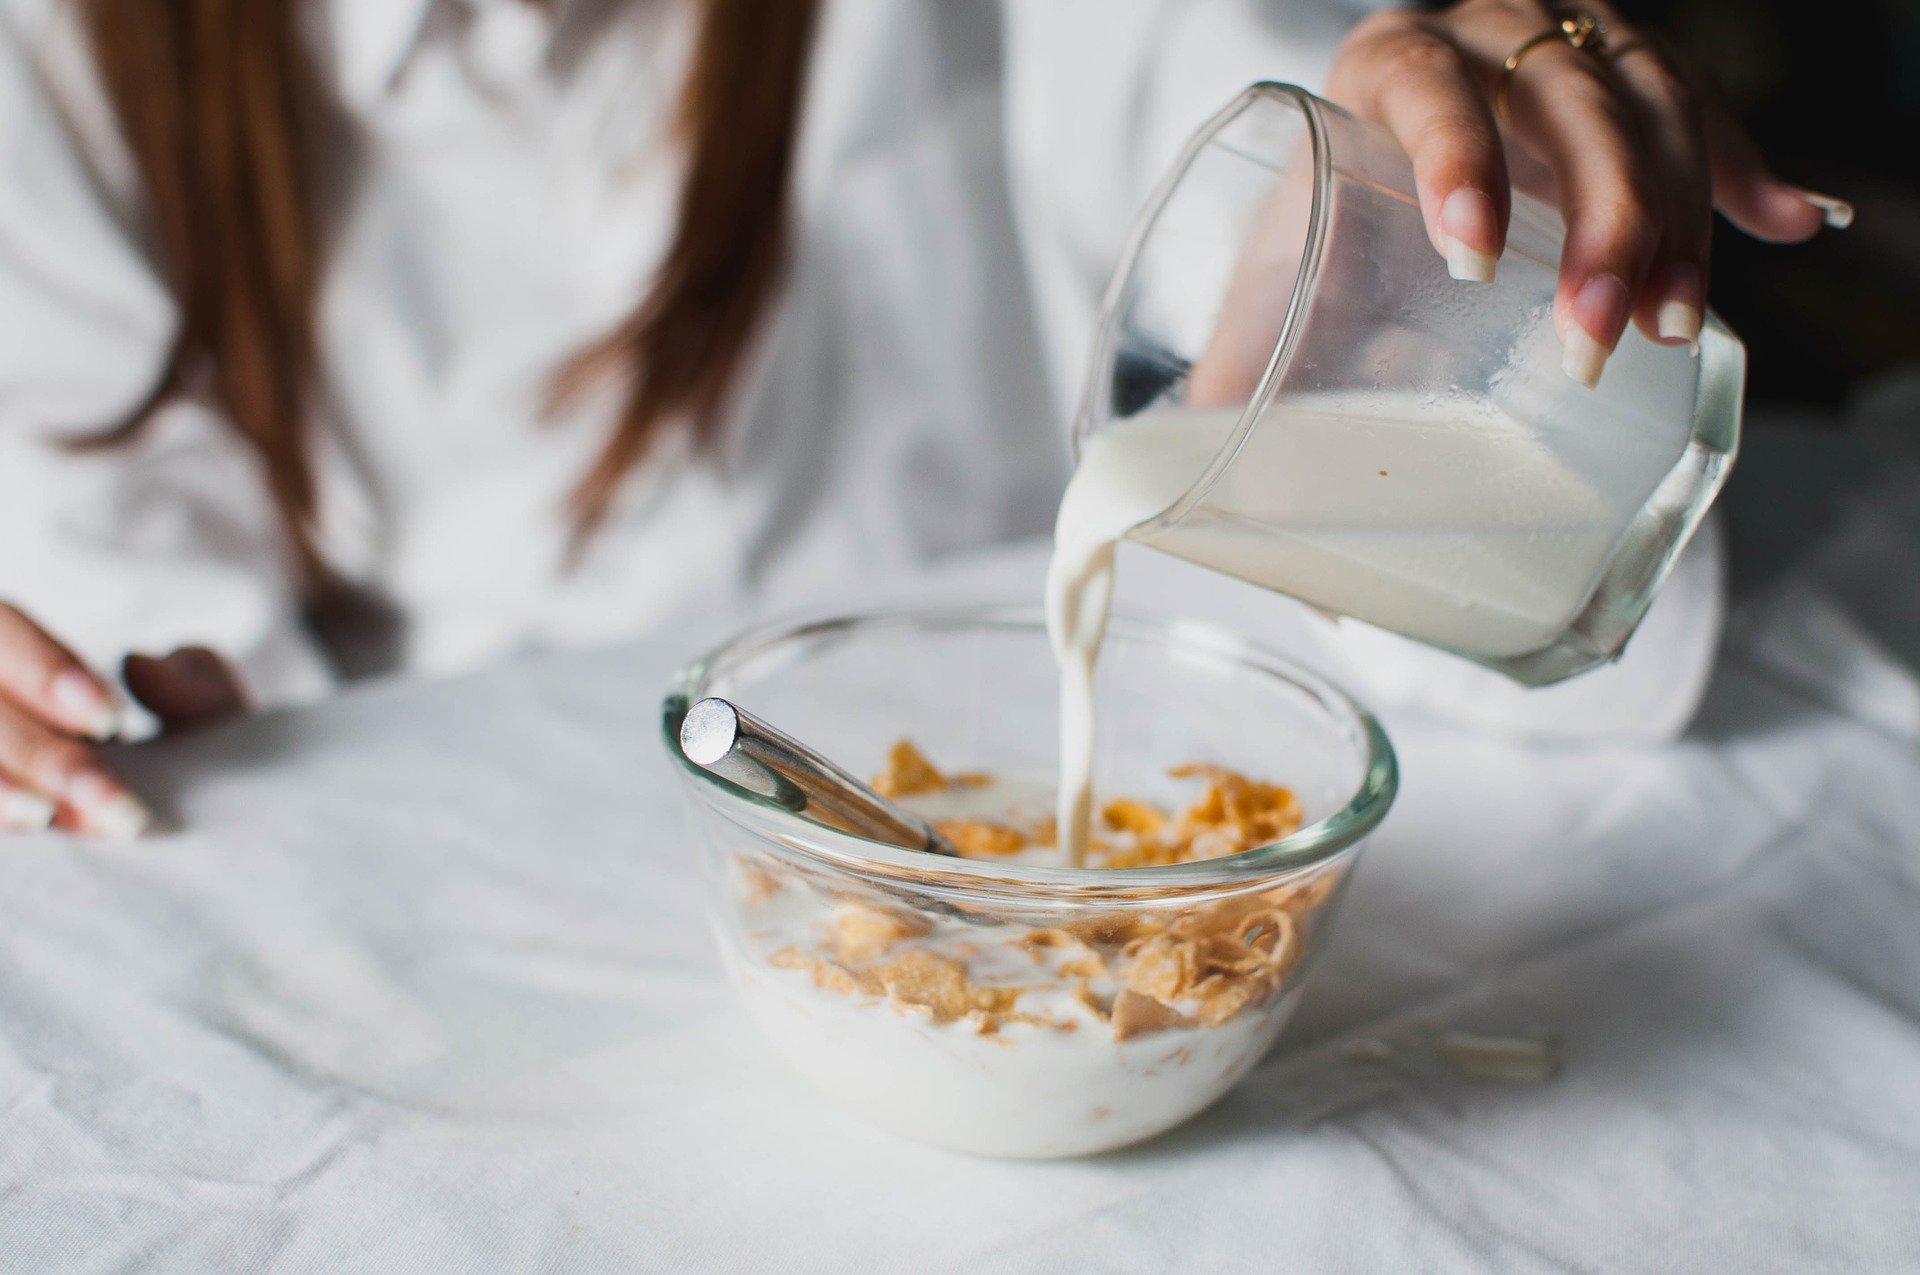 A woman pouring some milk into a cereal bowl | Photo: Pixabay/fancycrave1